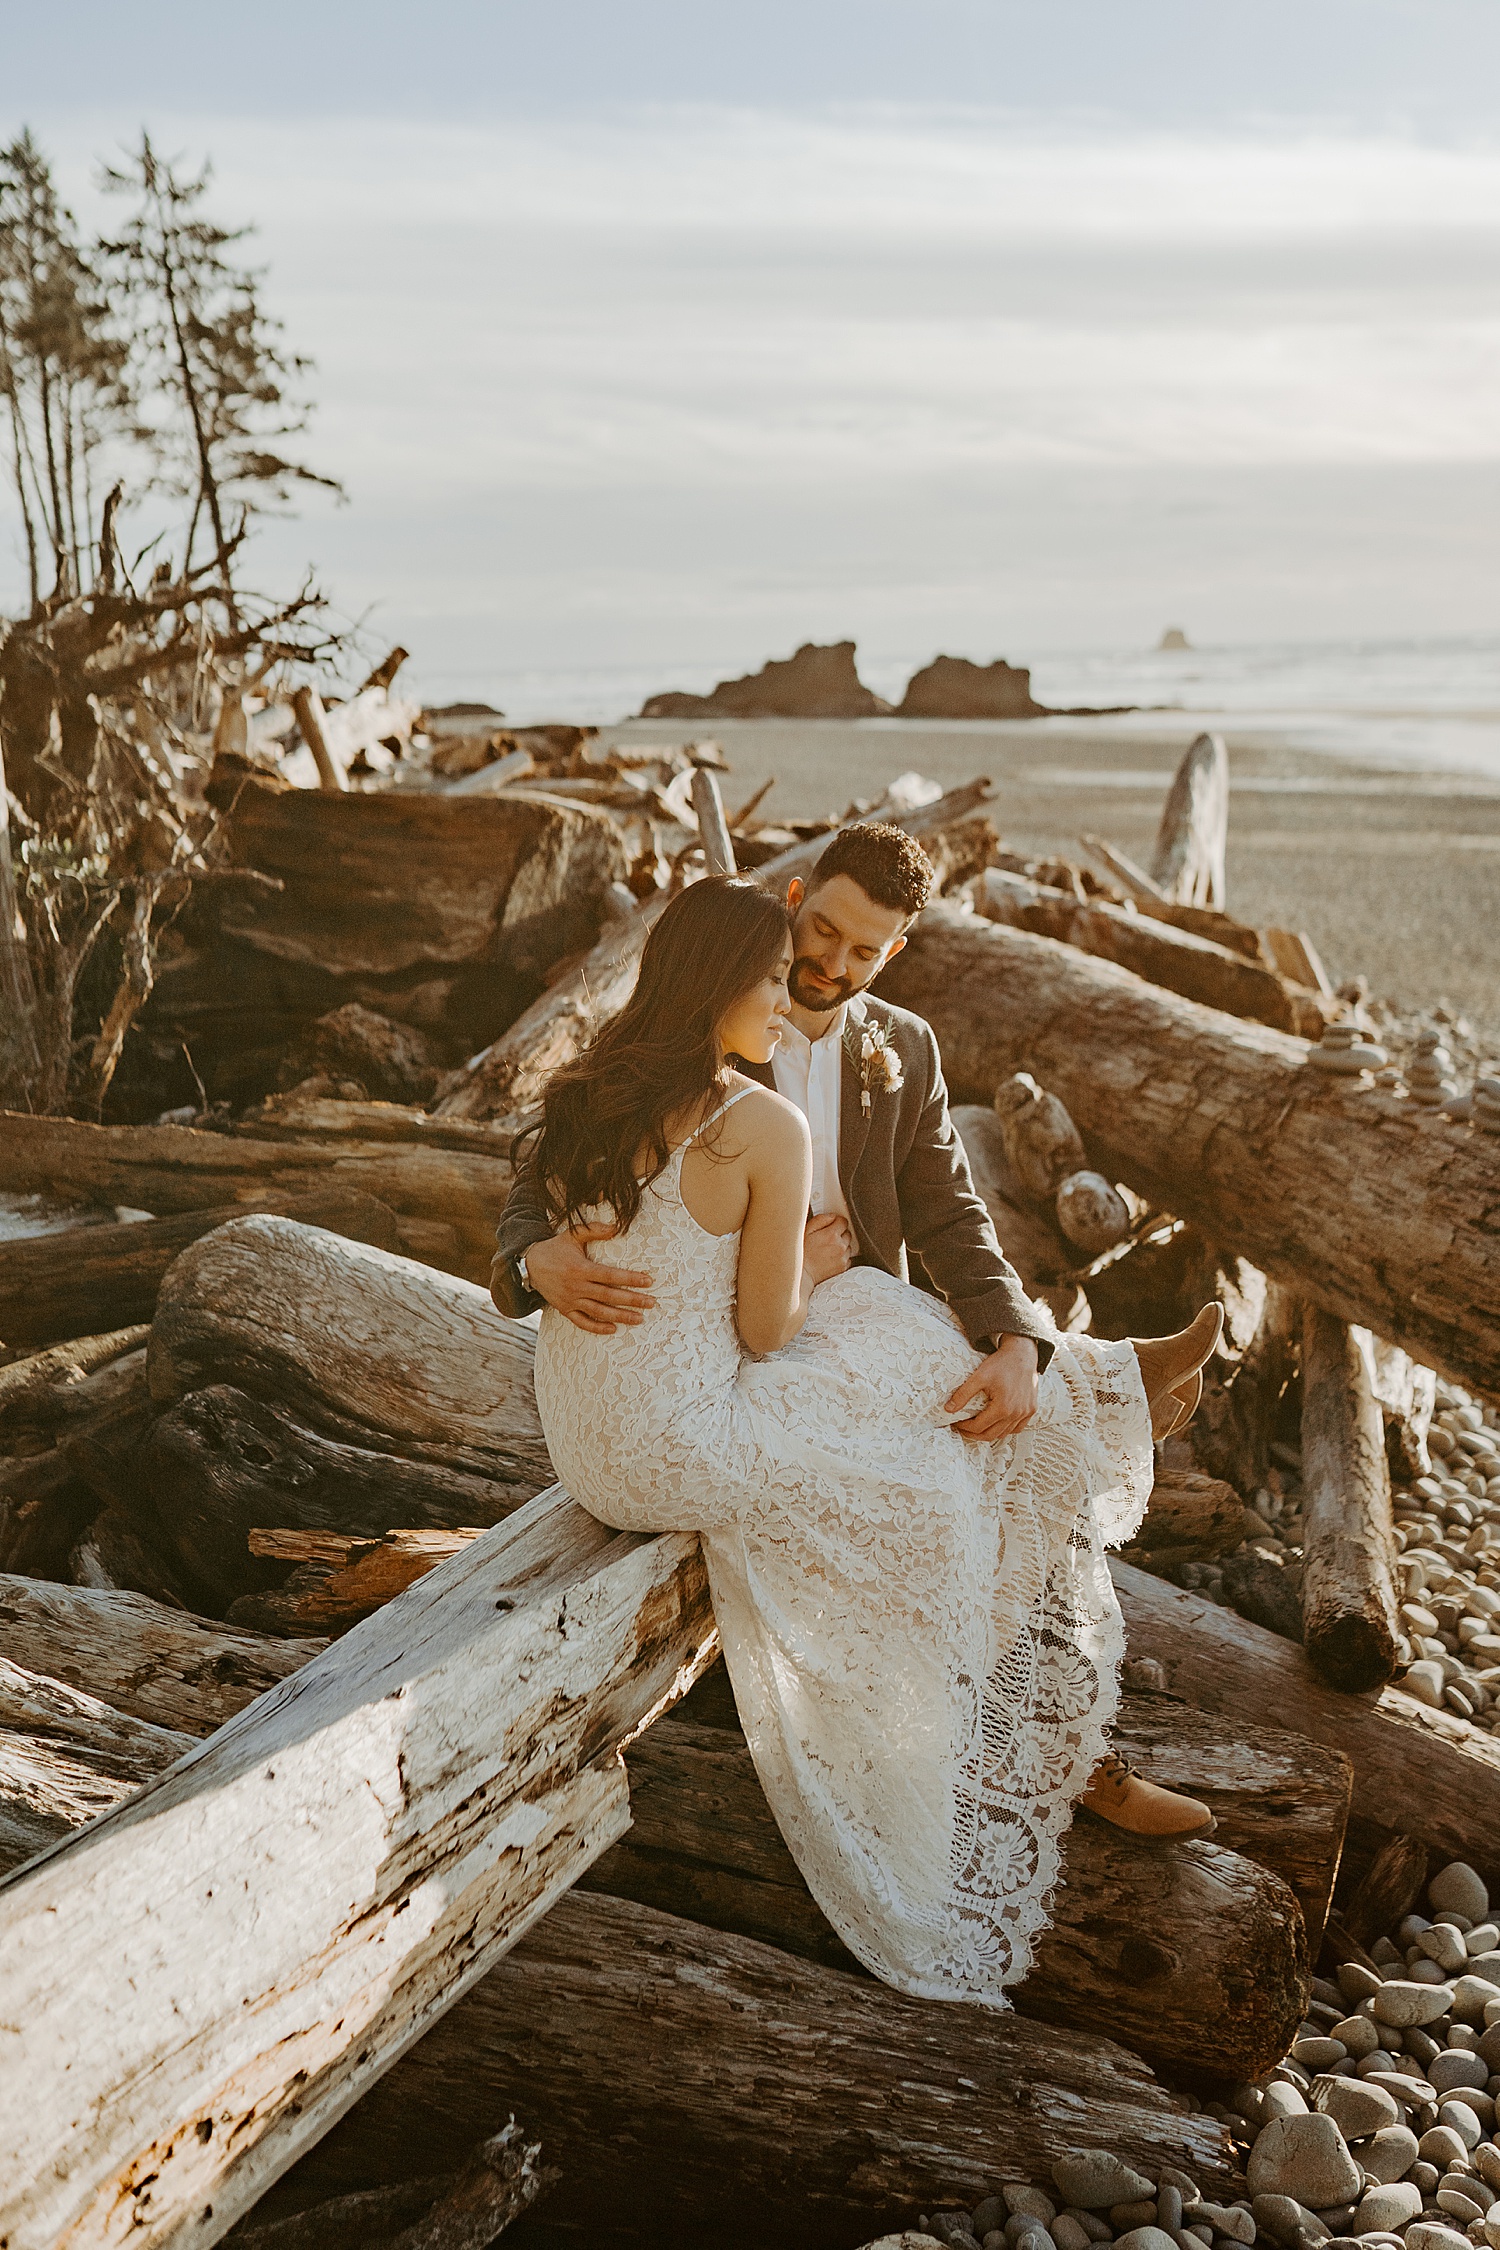 married couple sitting in their wedding attire on logs at the beach